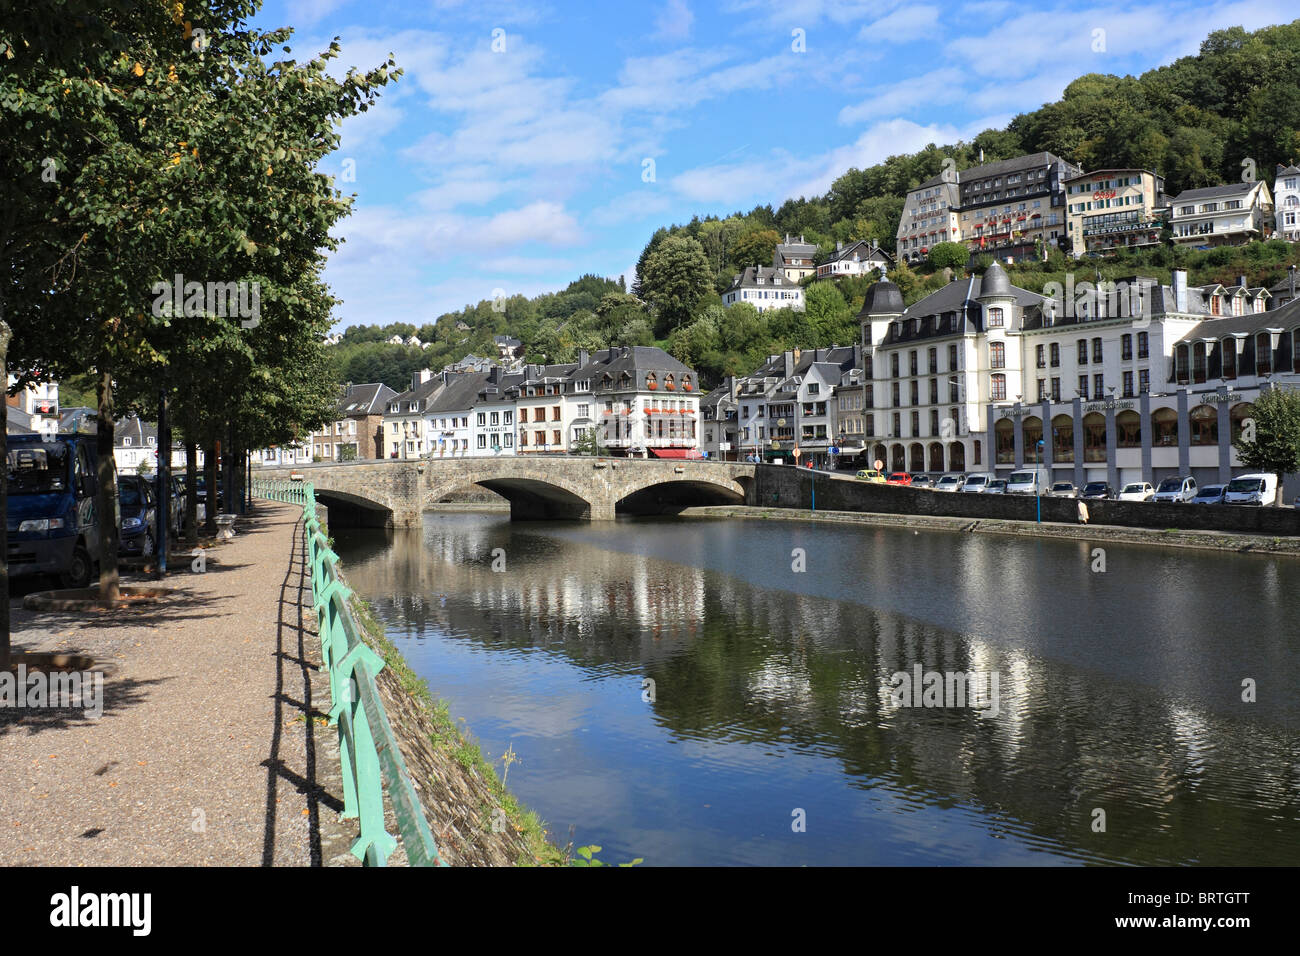 The town of Bouillon sits in a sharp bend of the river Semois in the ...